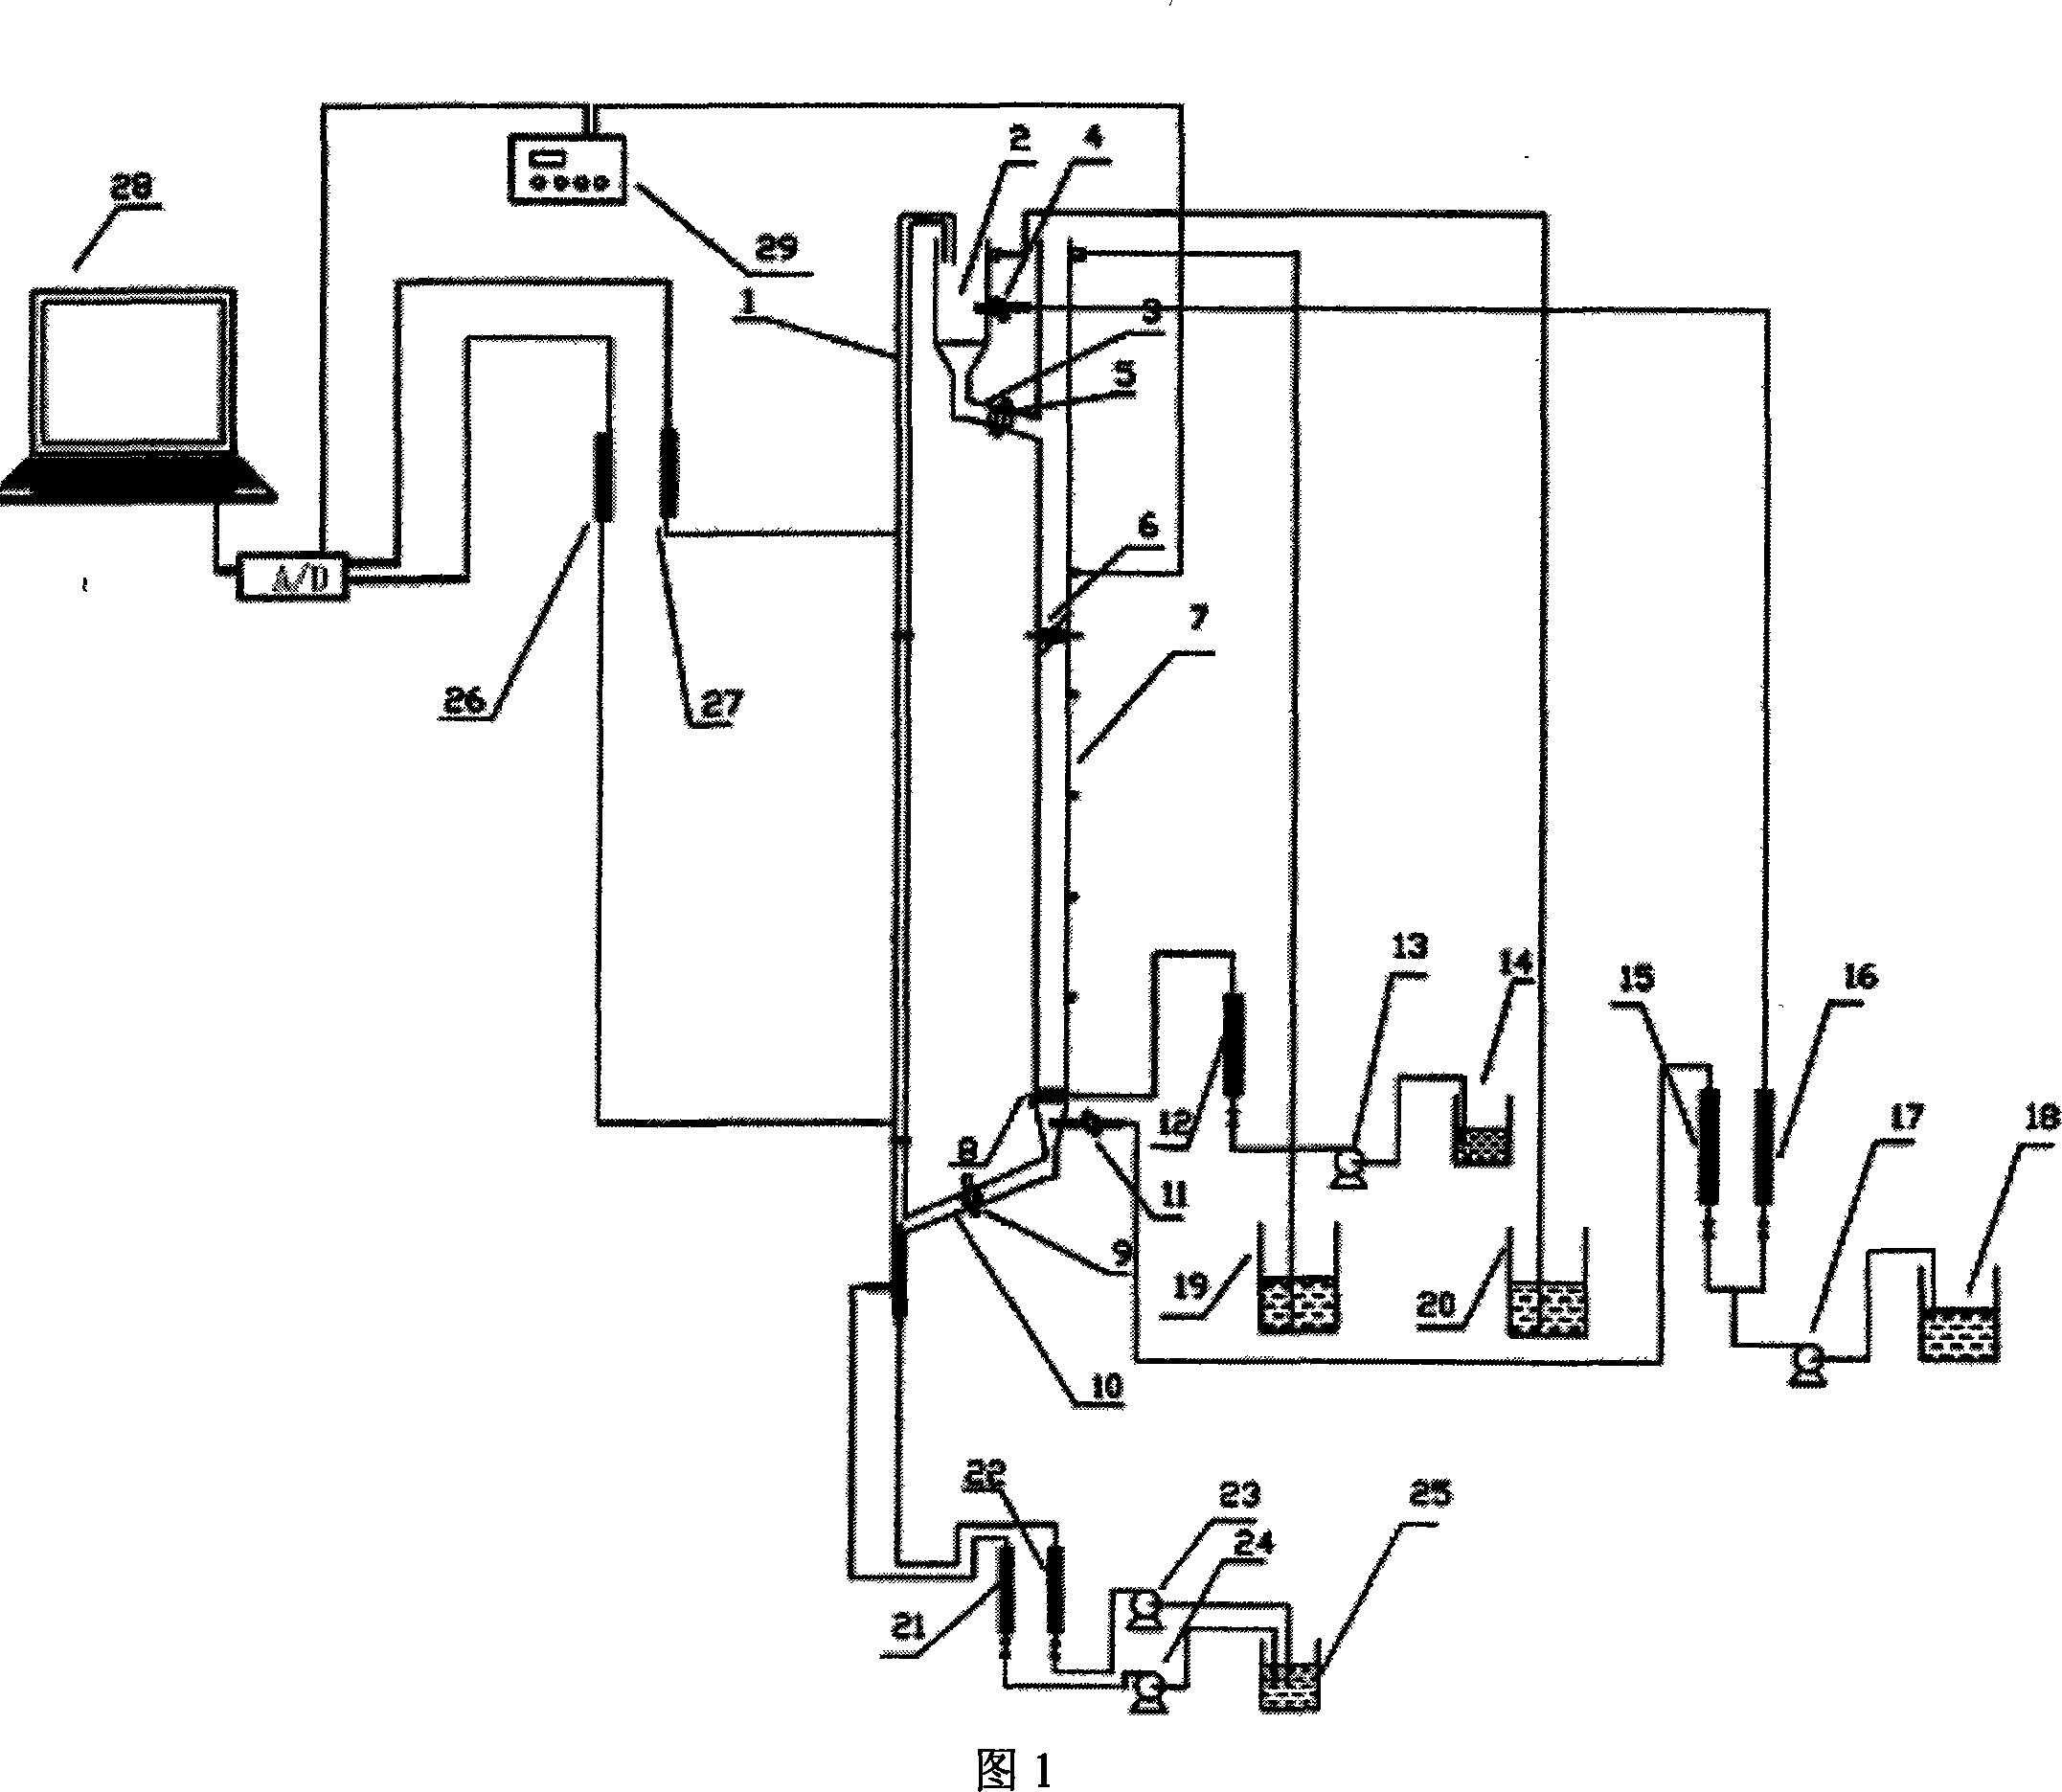 Liquid and solid circulating fluidised bed macroporous resin adsorption device